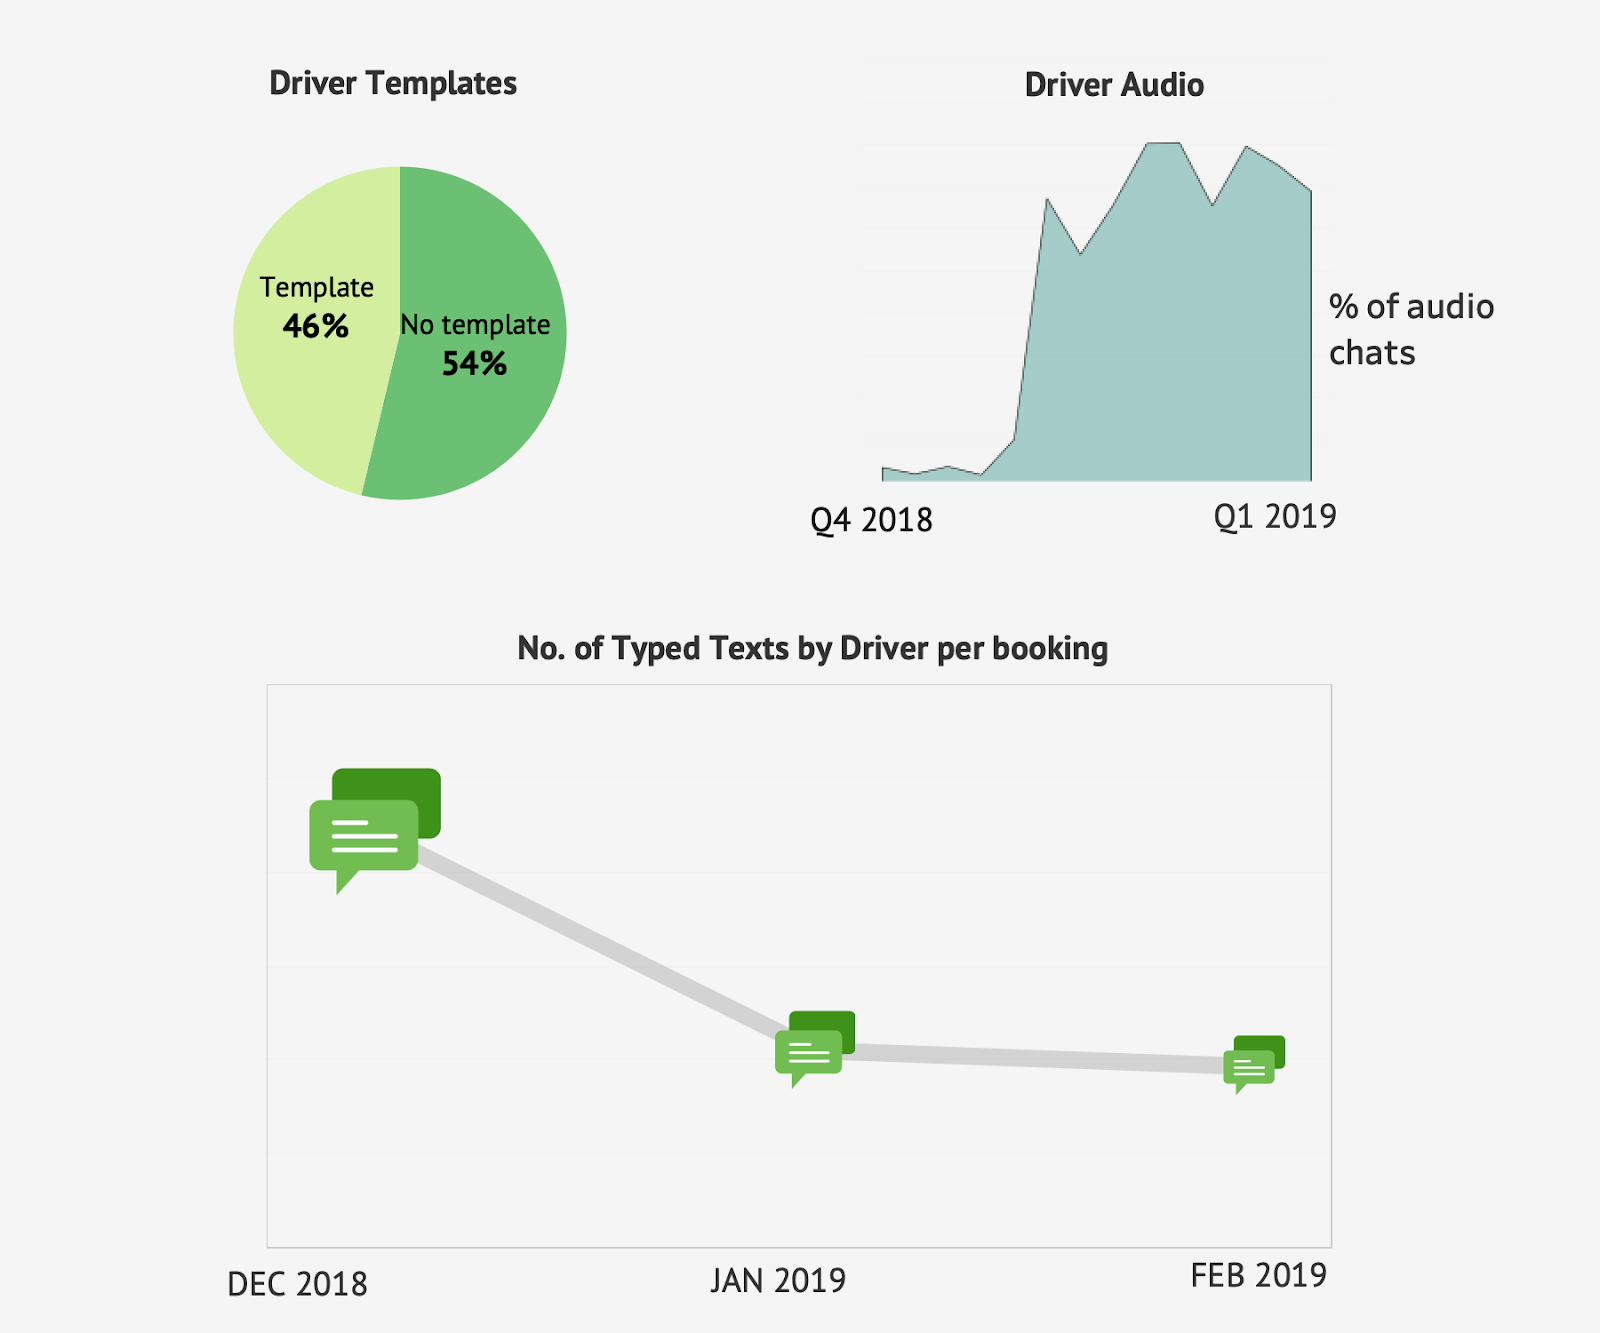 Templates and audio features used by driver-partners, and a reduced number of typed texts by driver-partners per booking